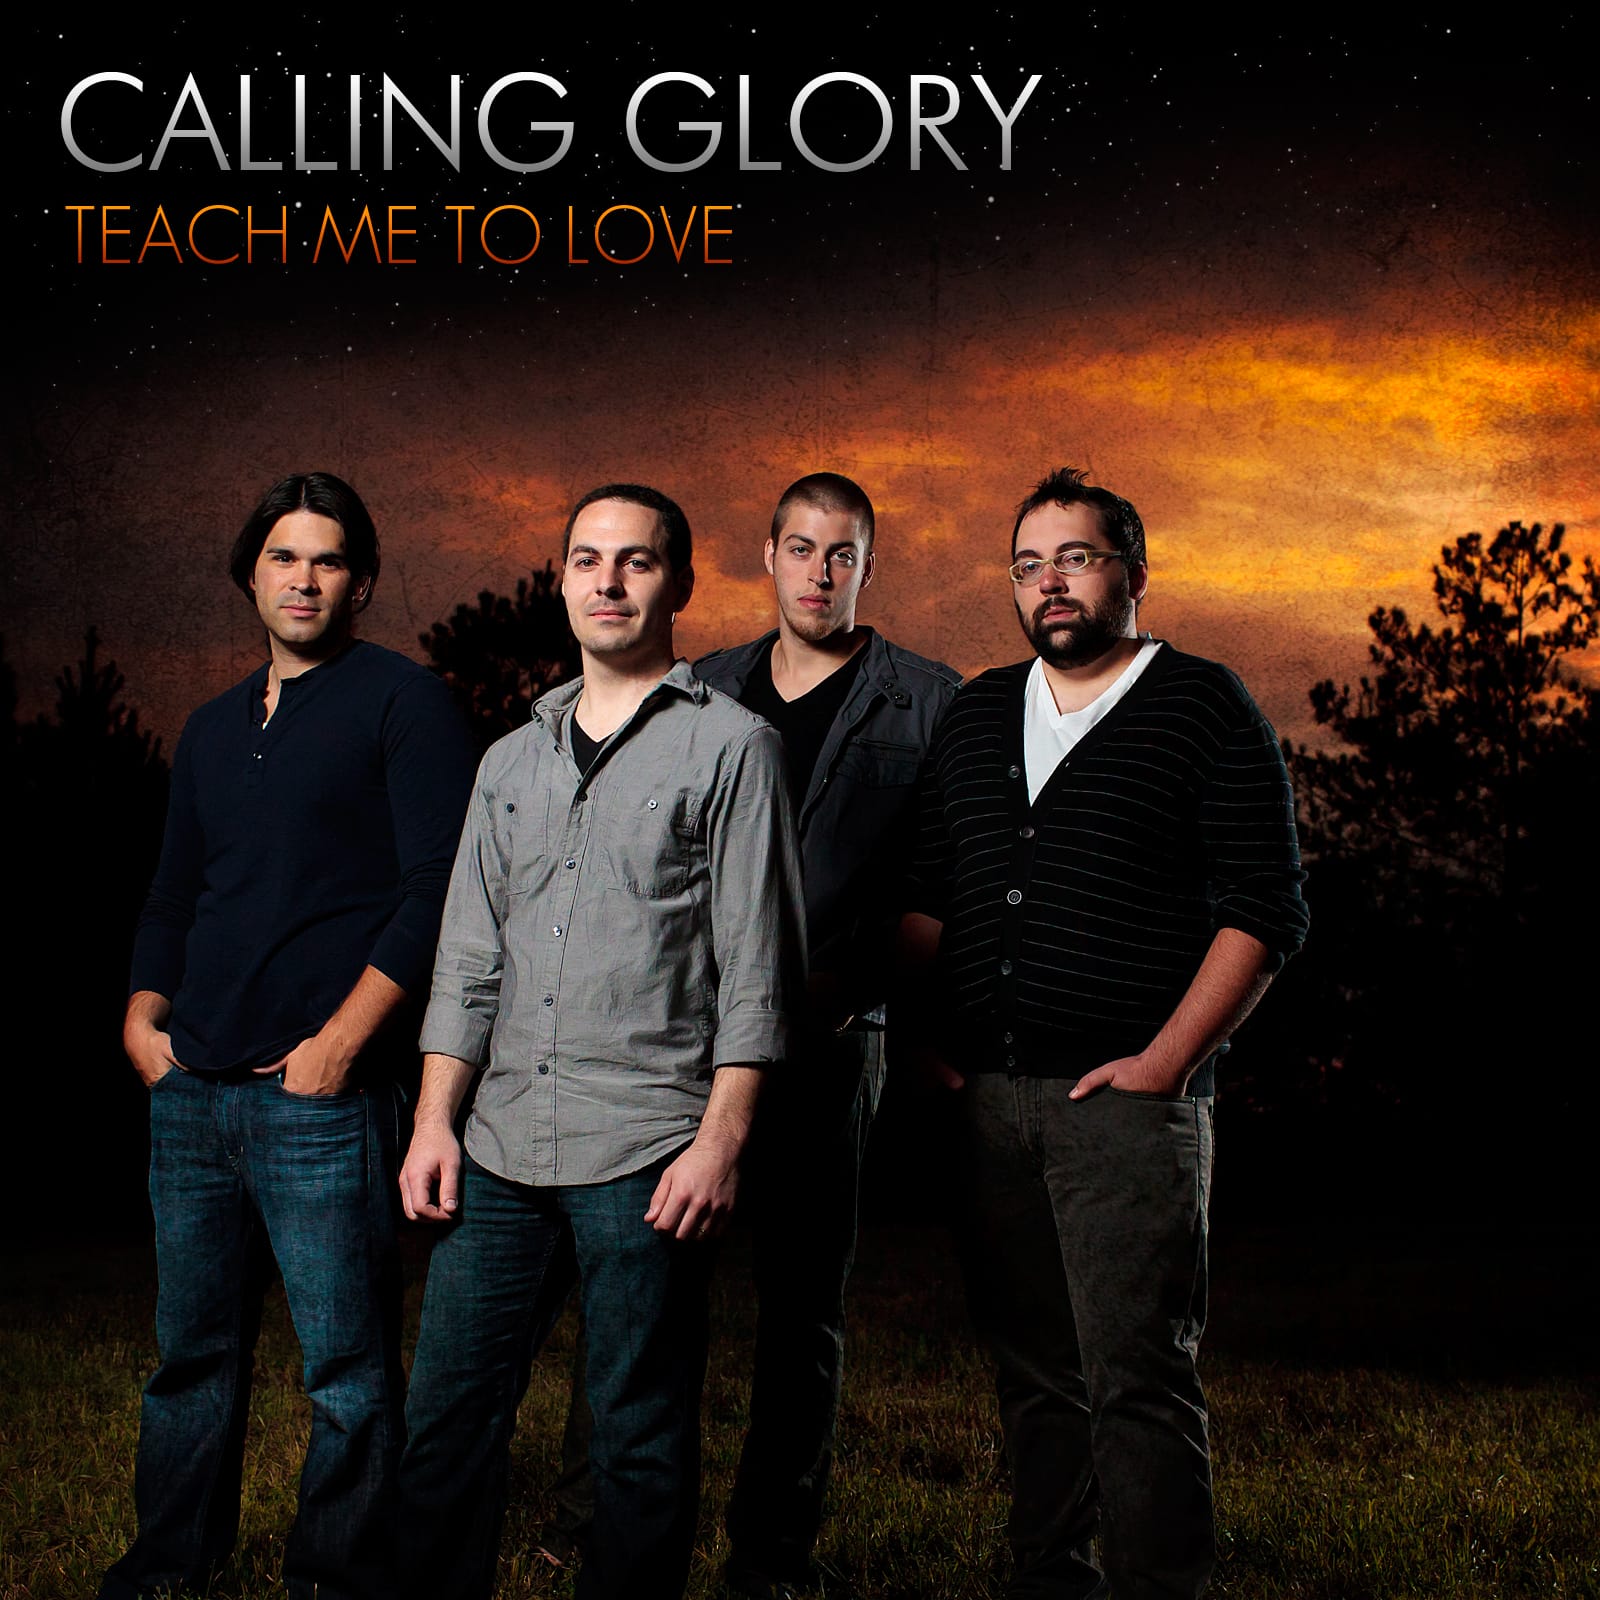 Christian Rock Bands in Tennessee,